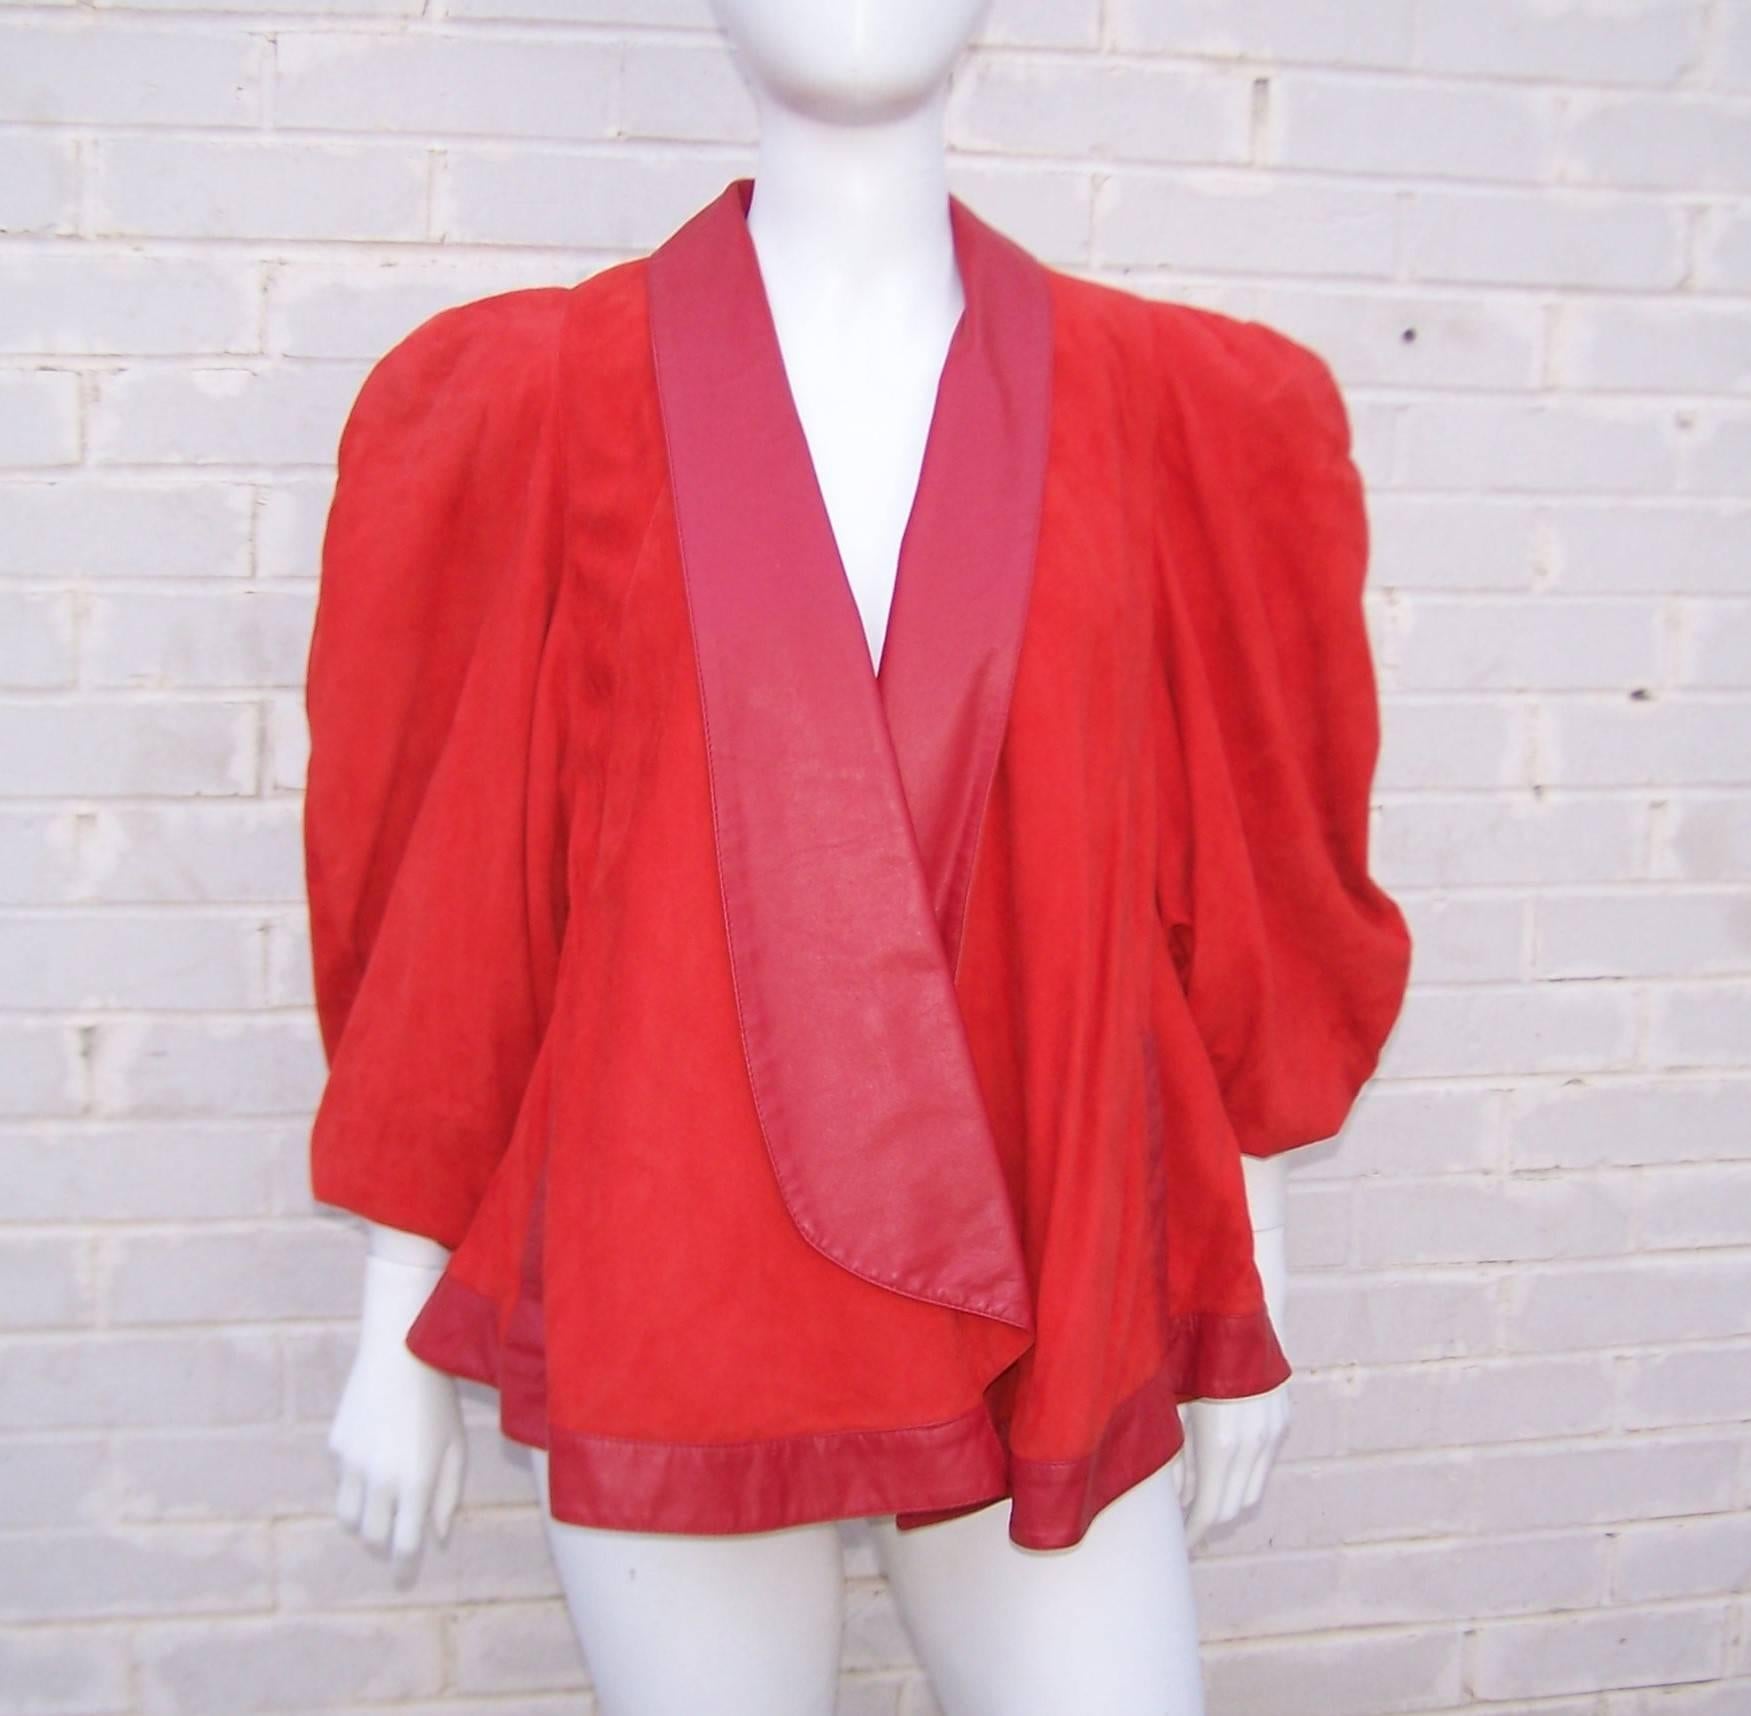 New Wave 1980's Lipstick Red Suede Leather Skirt Suit With Swing Jacket 2